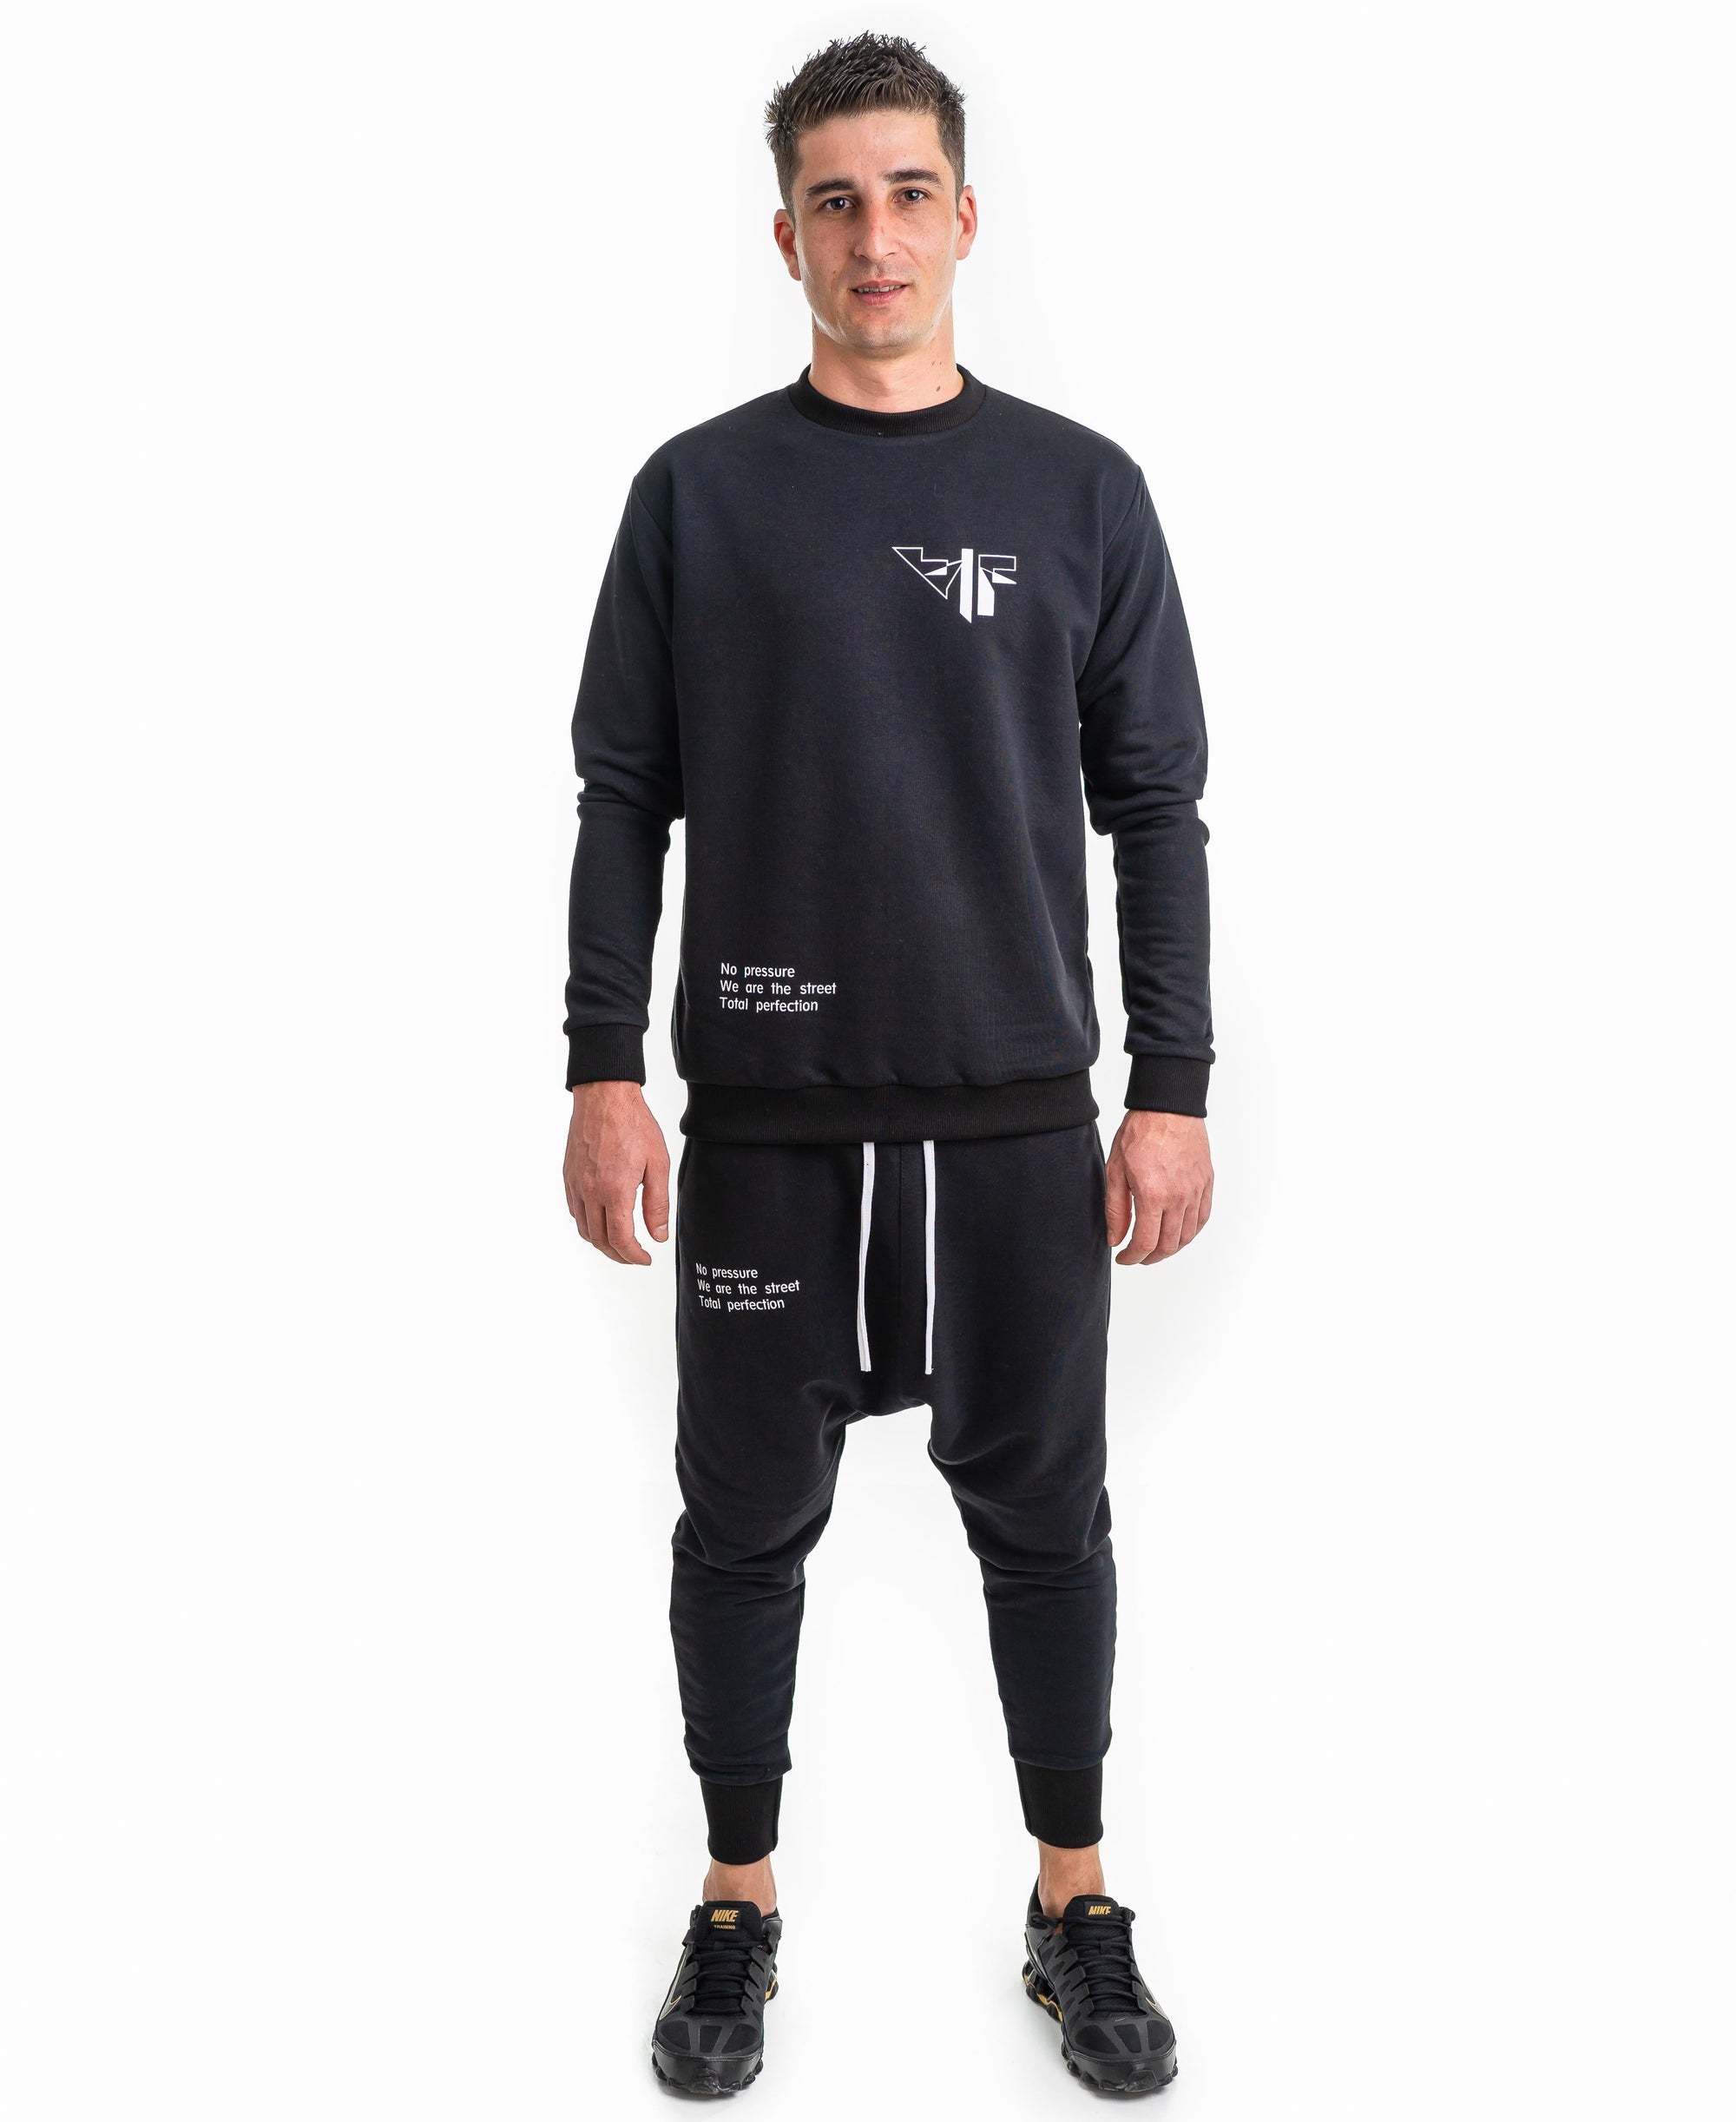 Black tracksuit with printed text